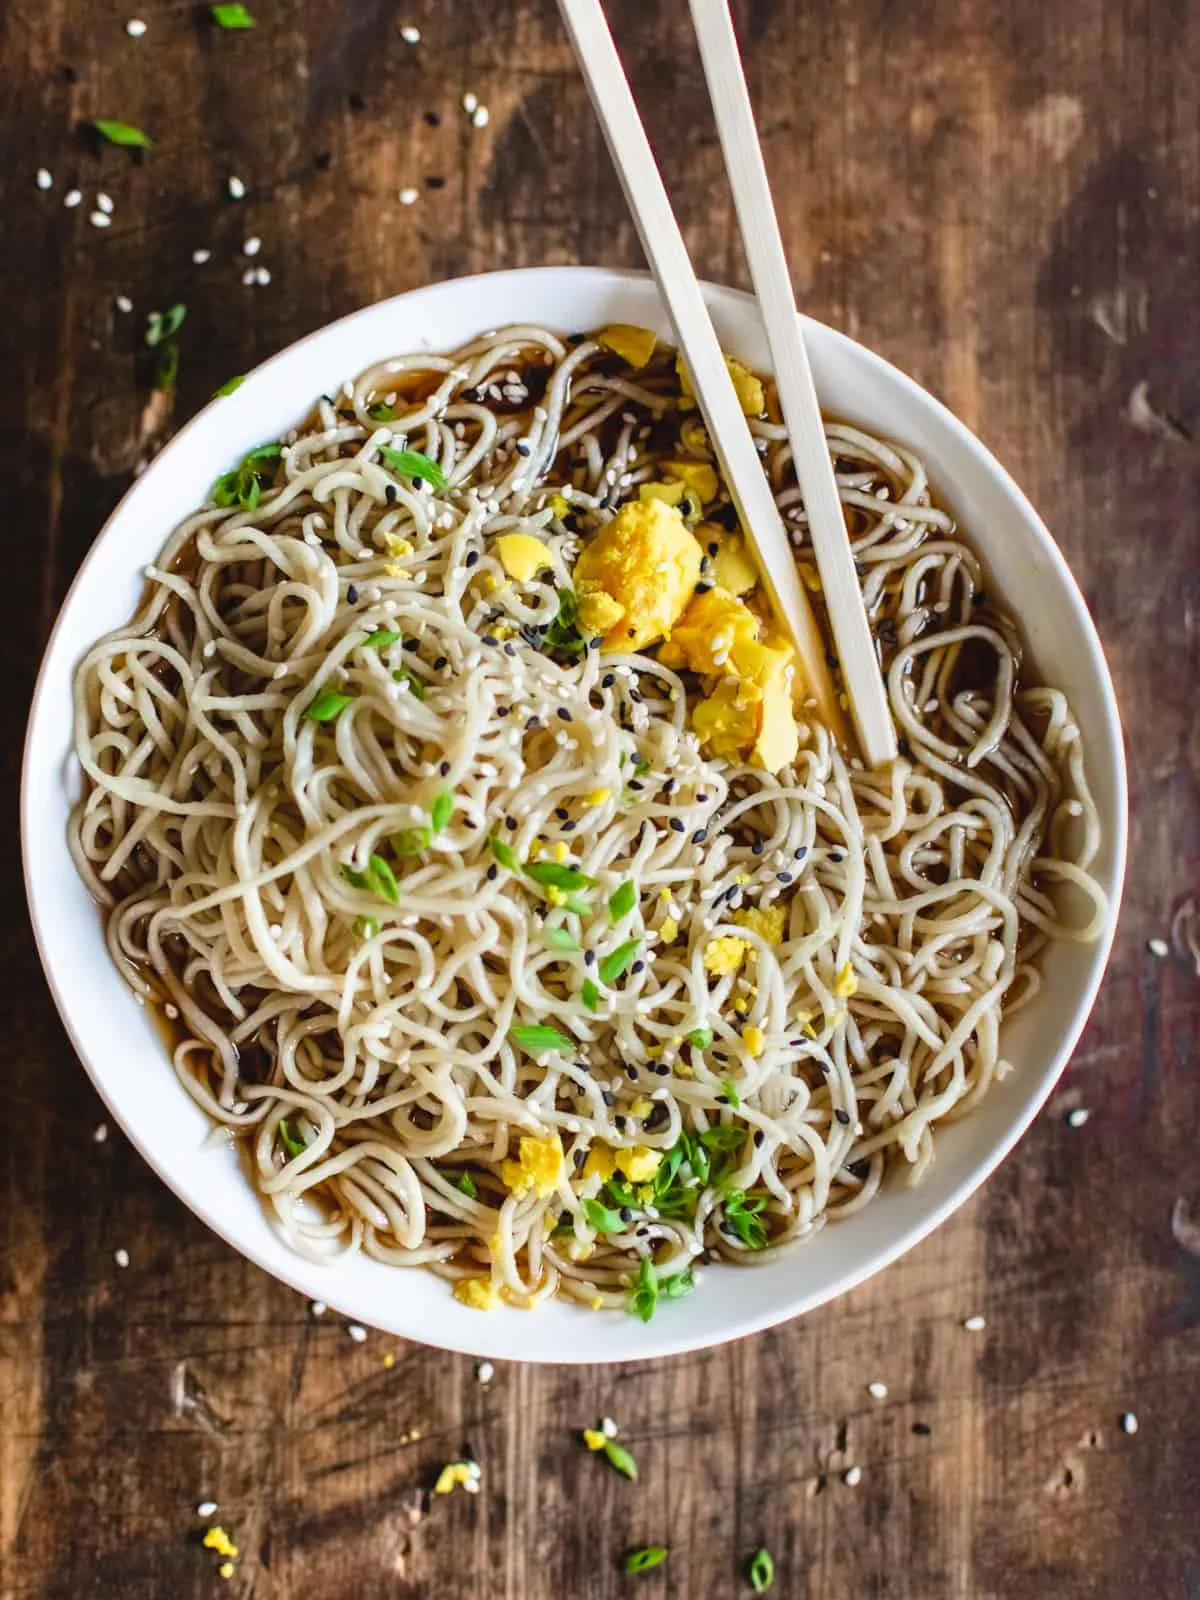 Bowl of ramen noodles in broth with egg yolk, scallions, sesame seeds and chopsticks.